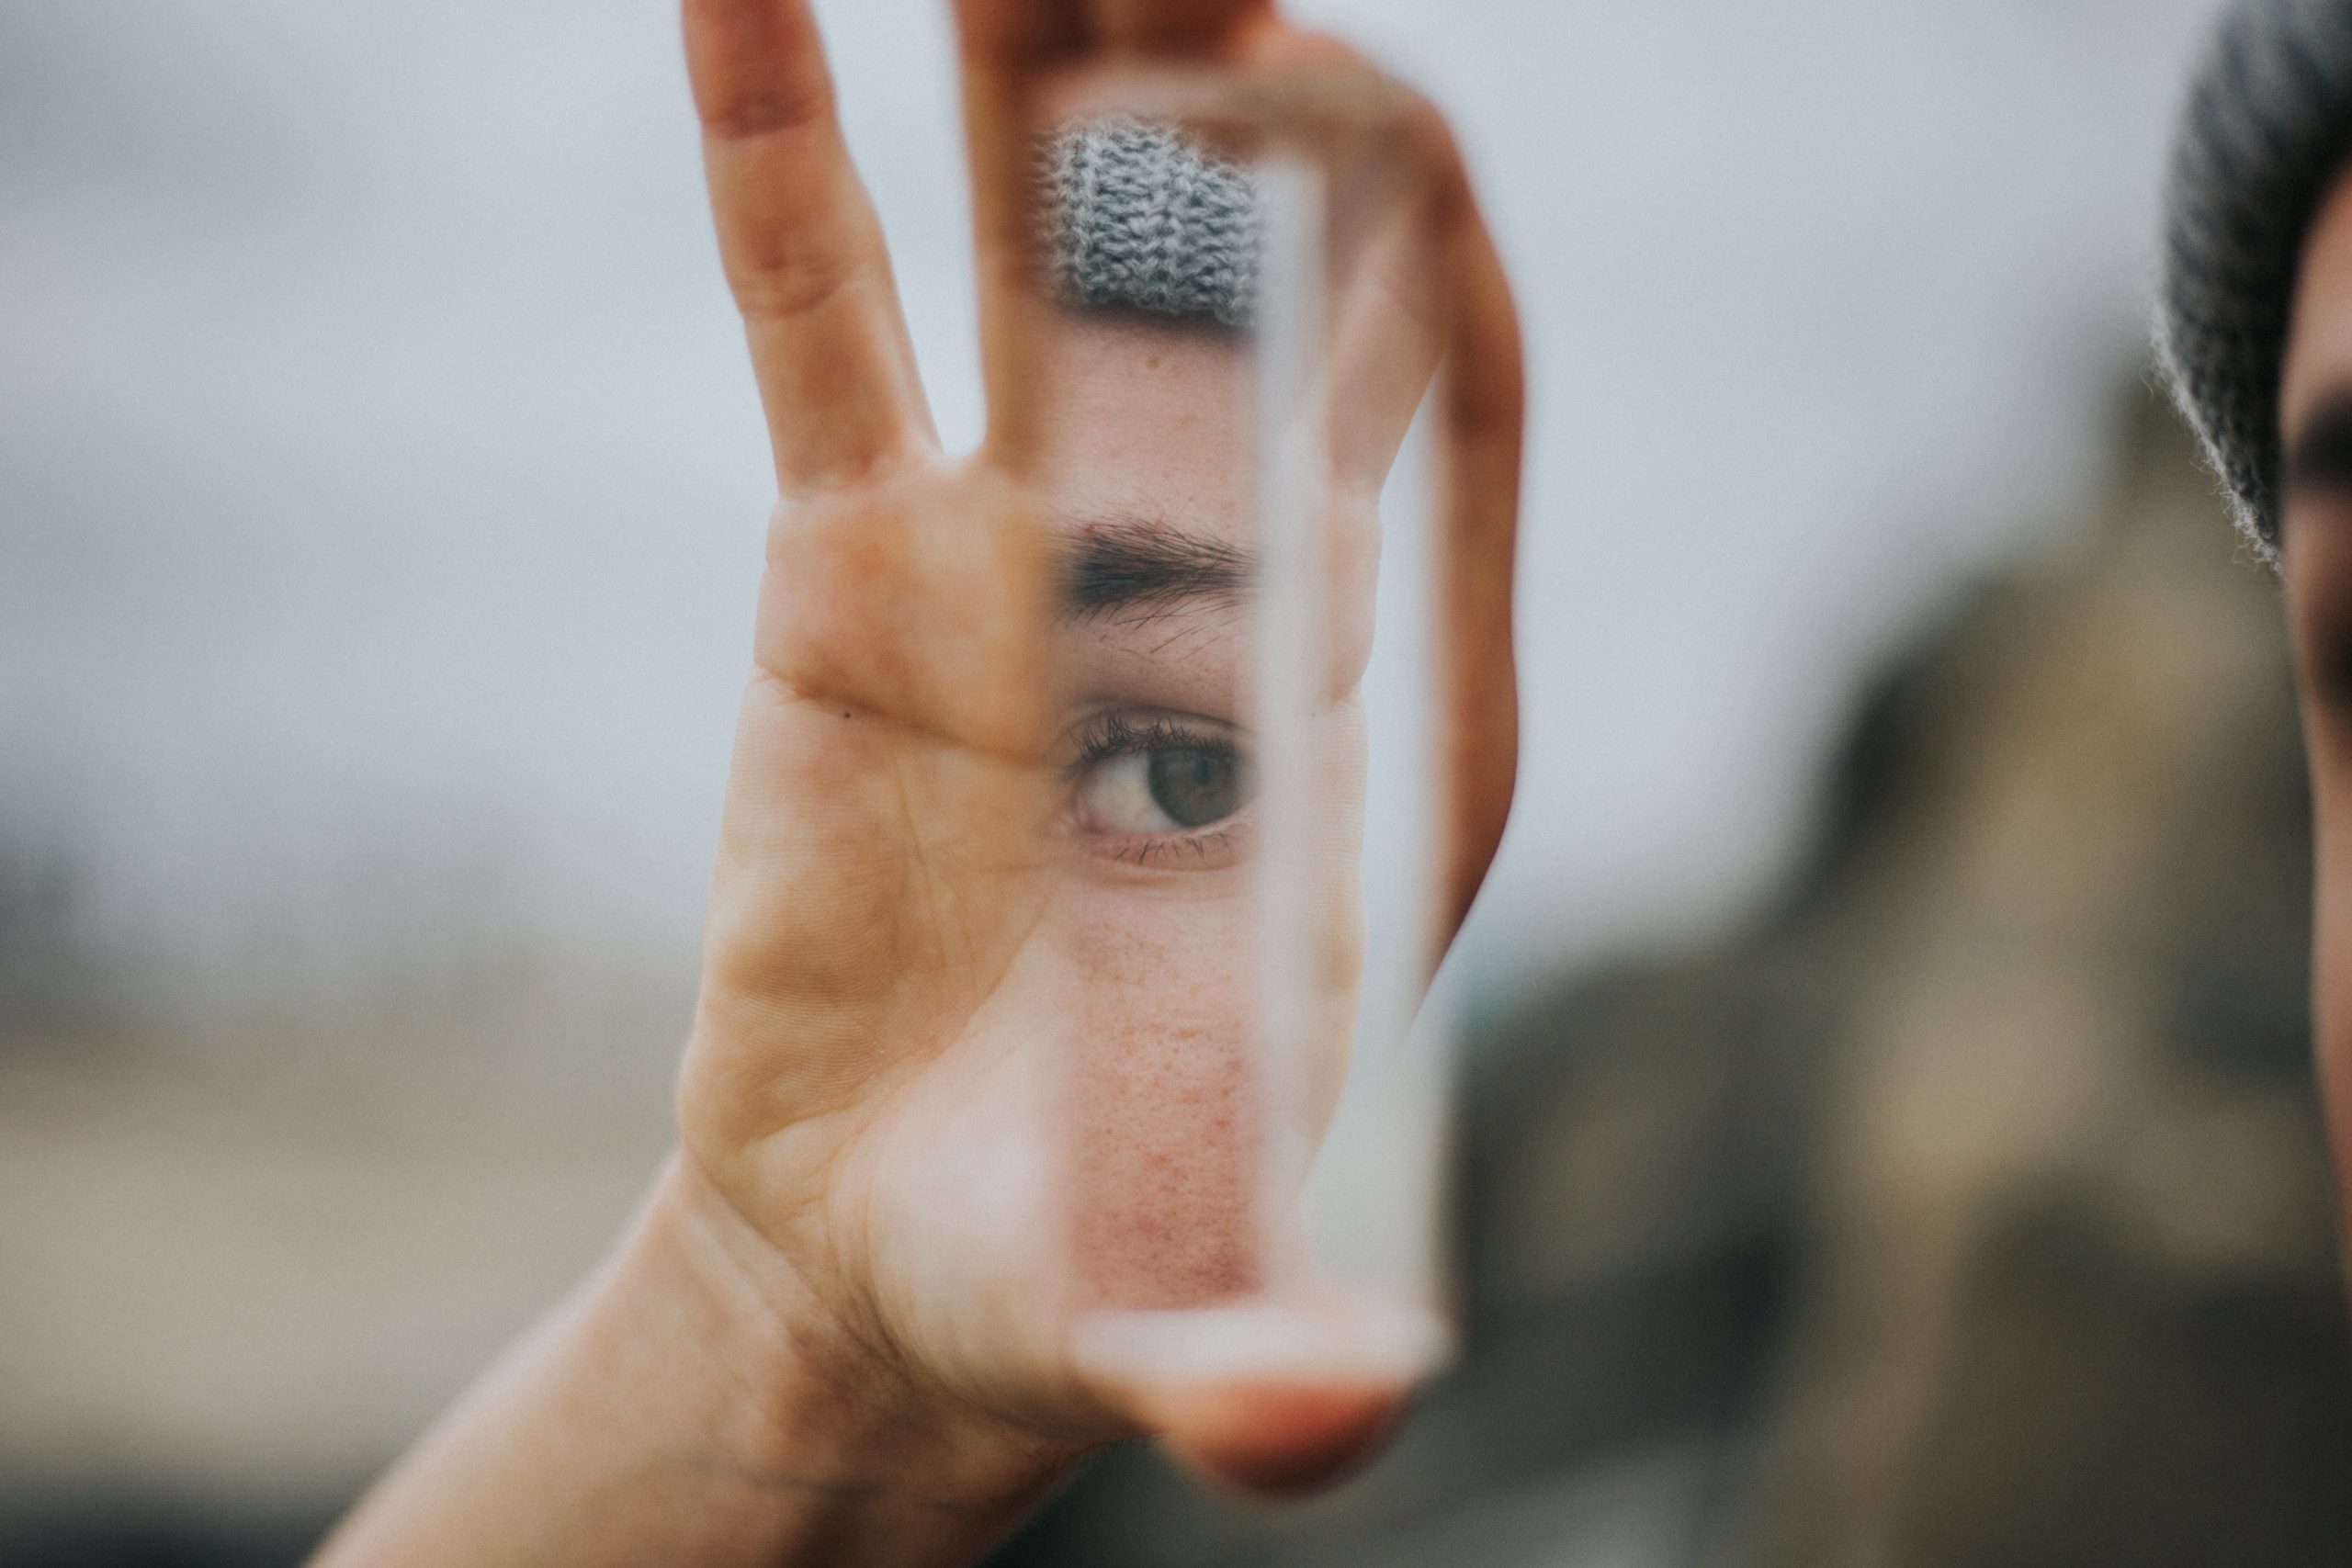 Person holding up small mirror shard, reflecting their eye